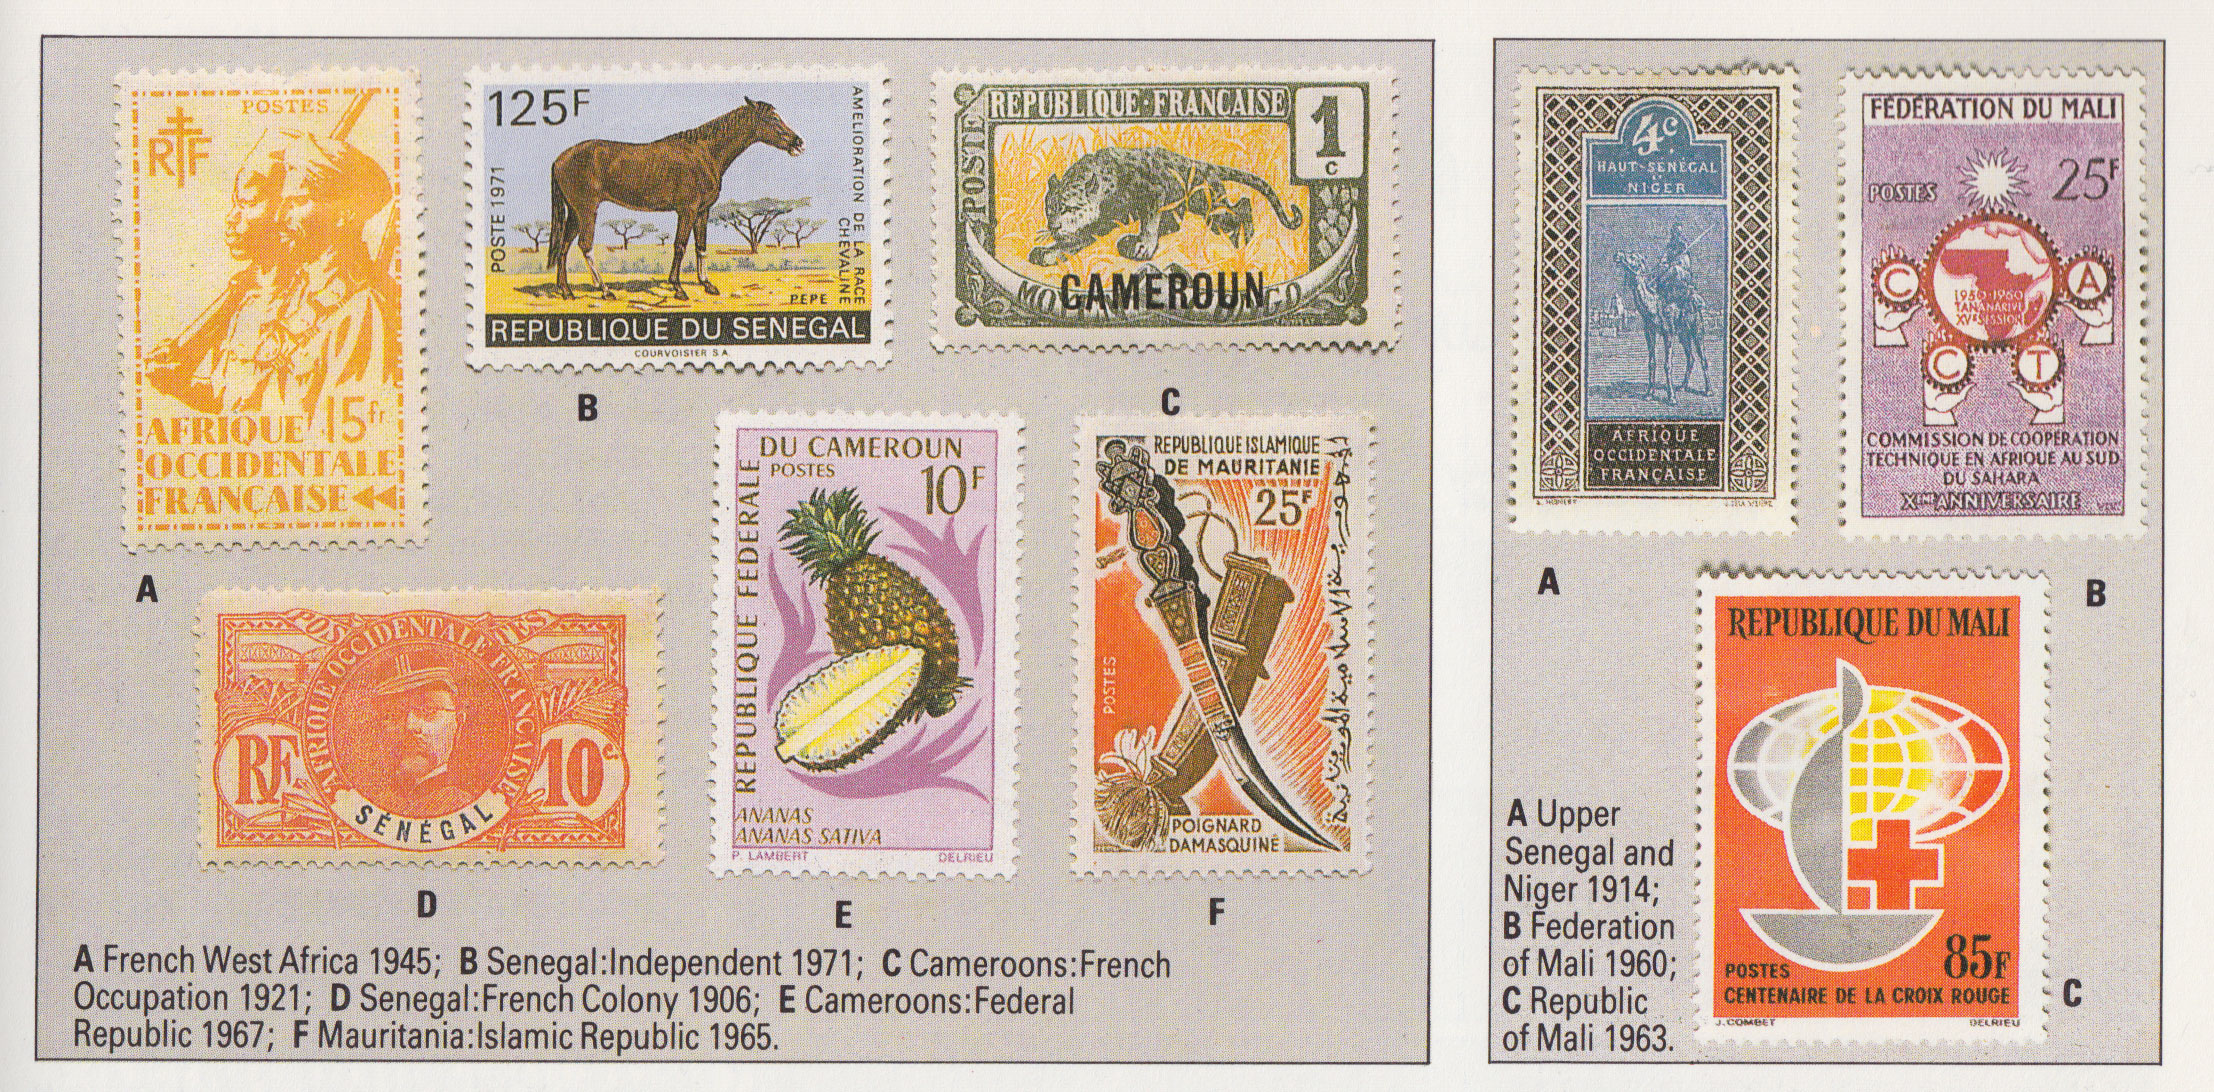 French West Africa stamp